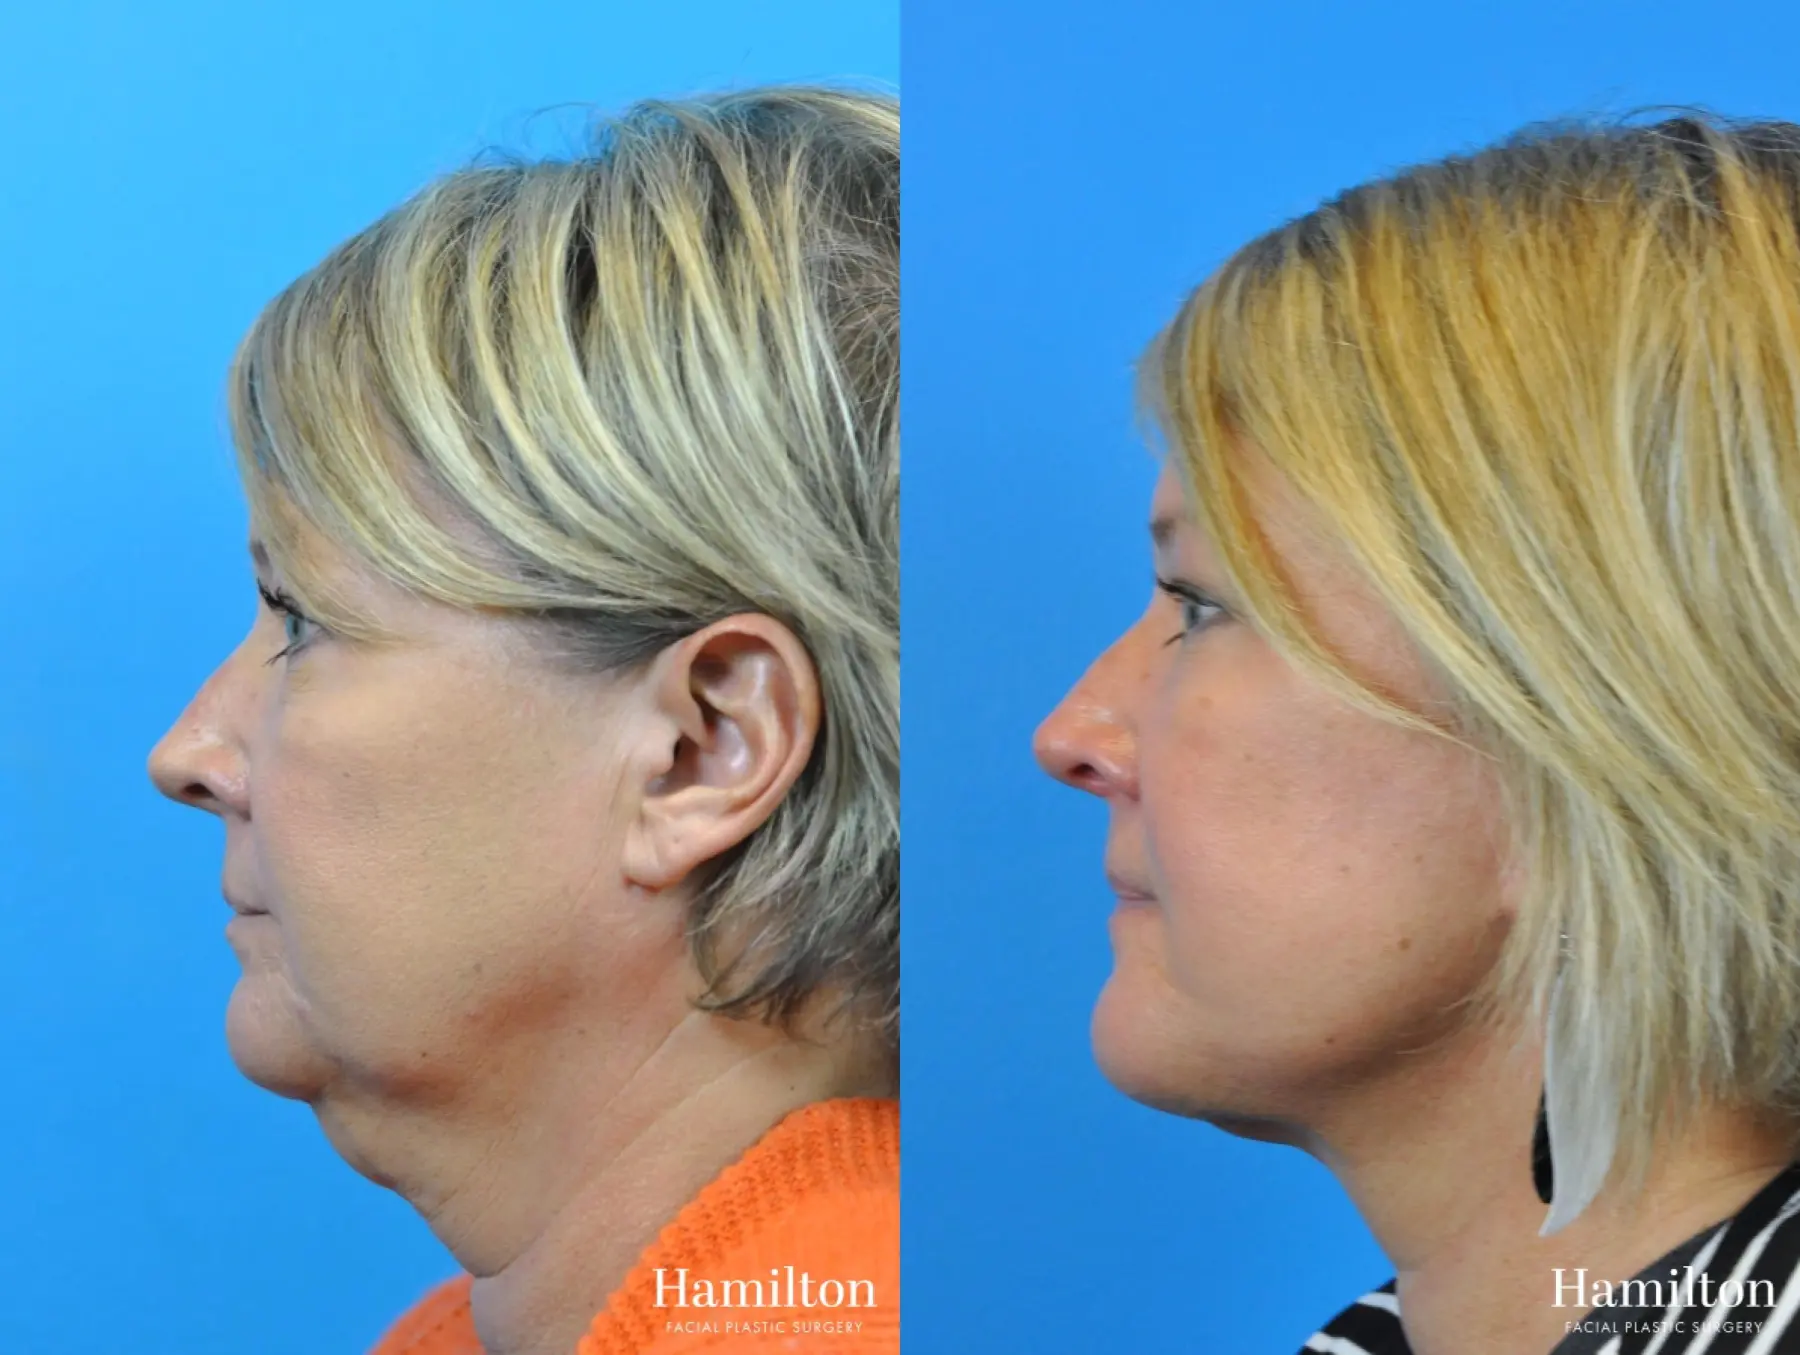 Facelift: Patient 7 - Before and After  